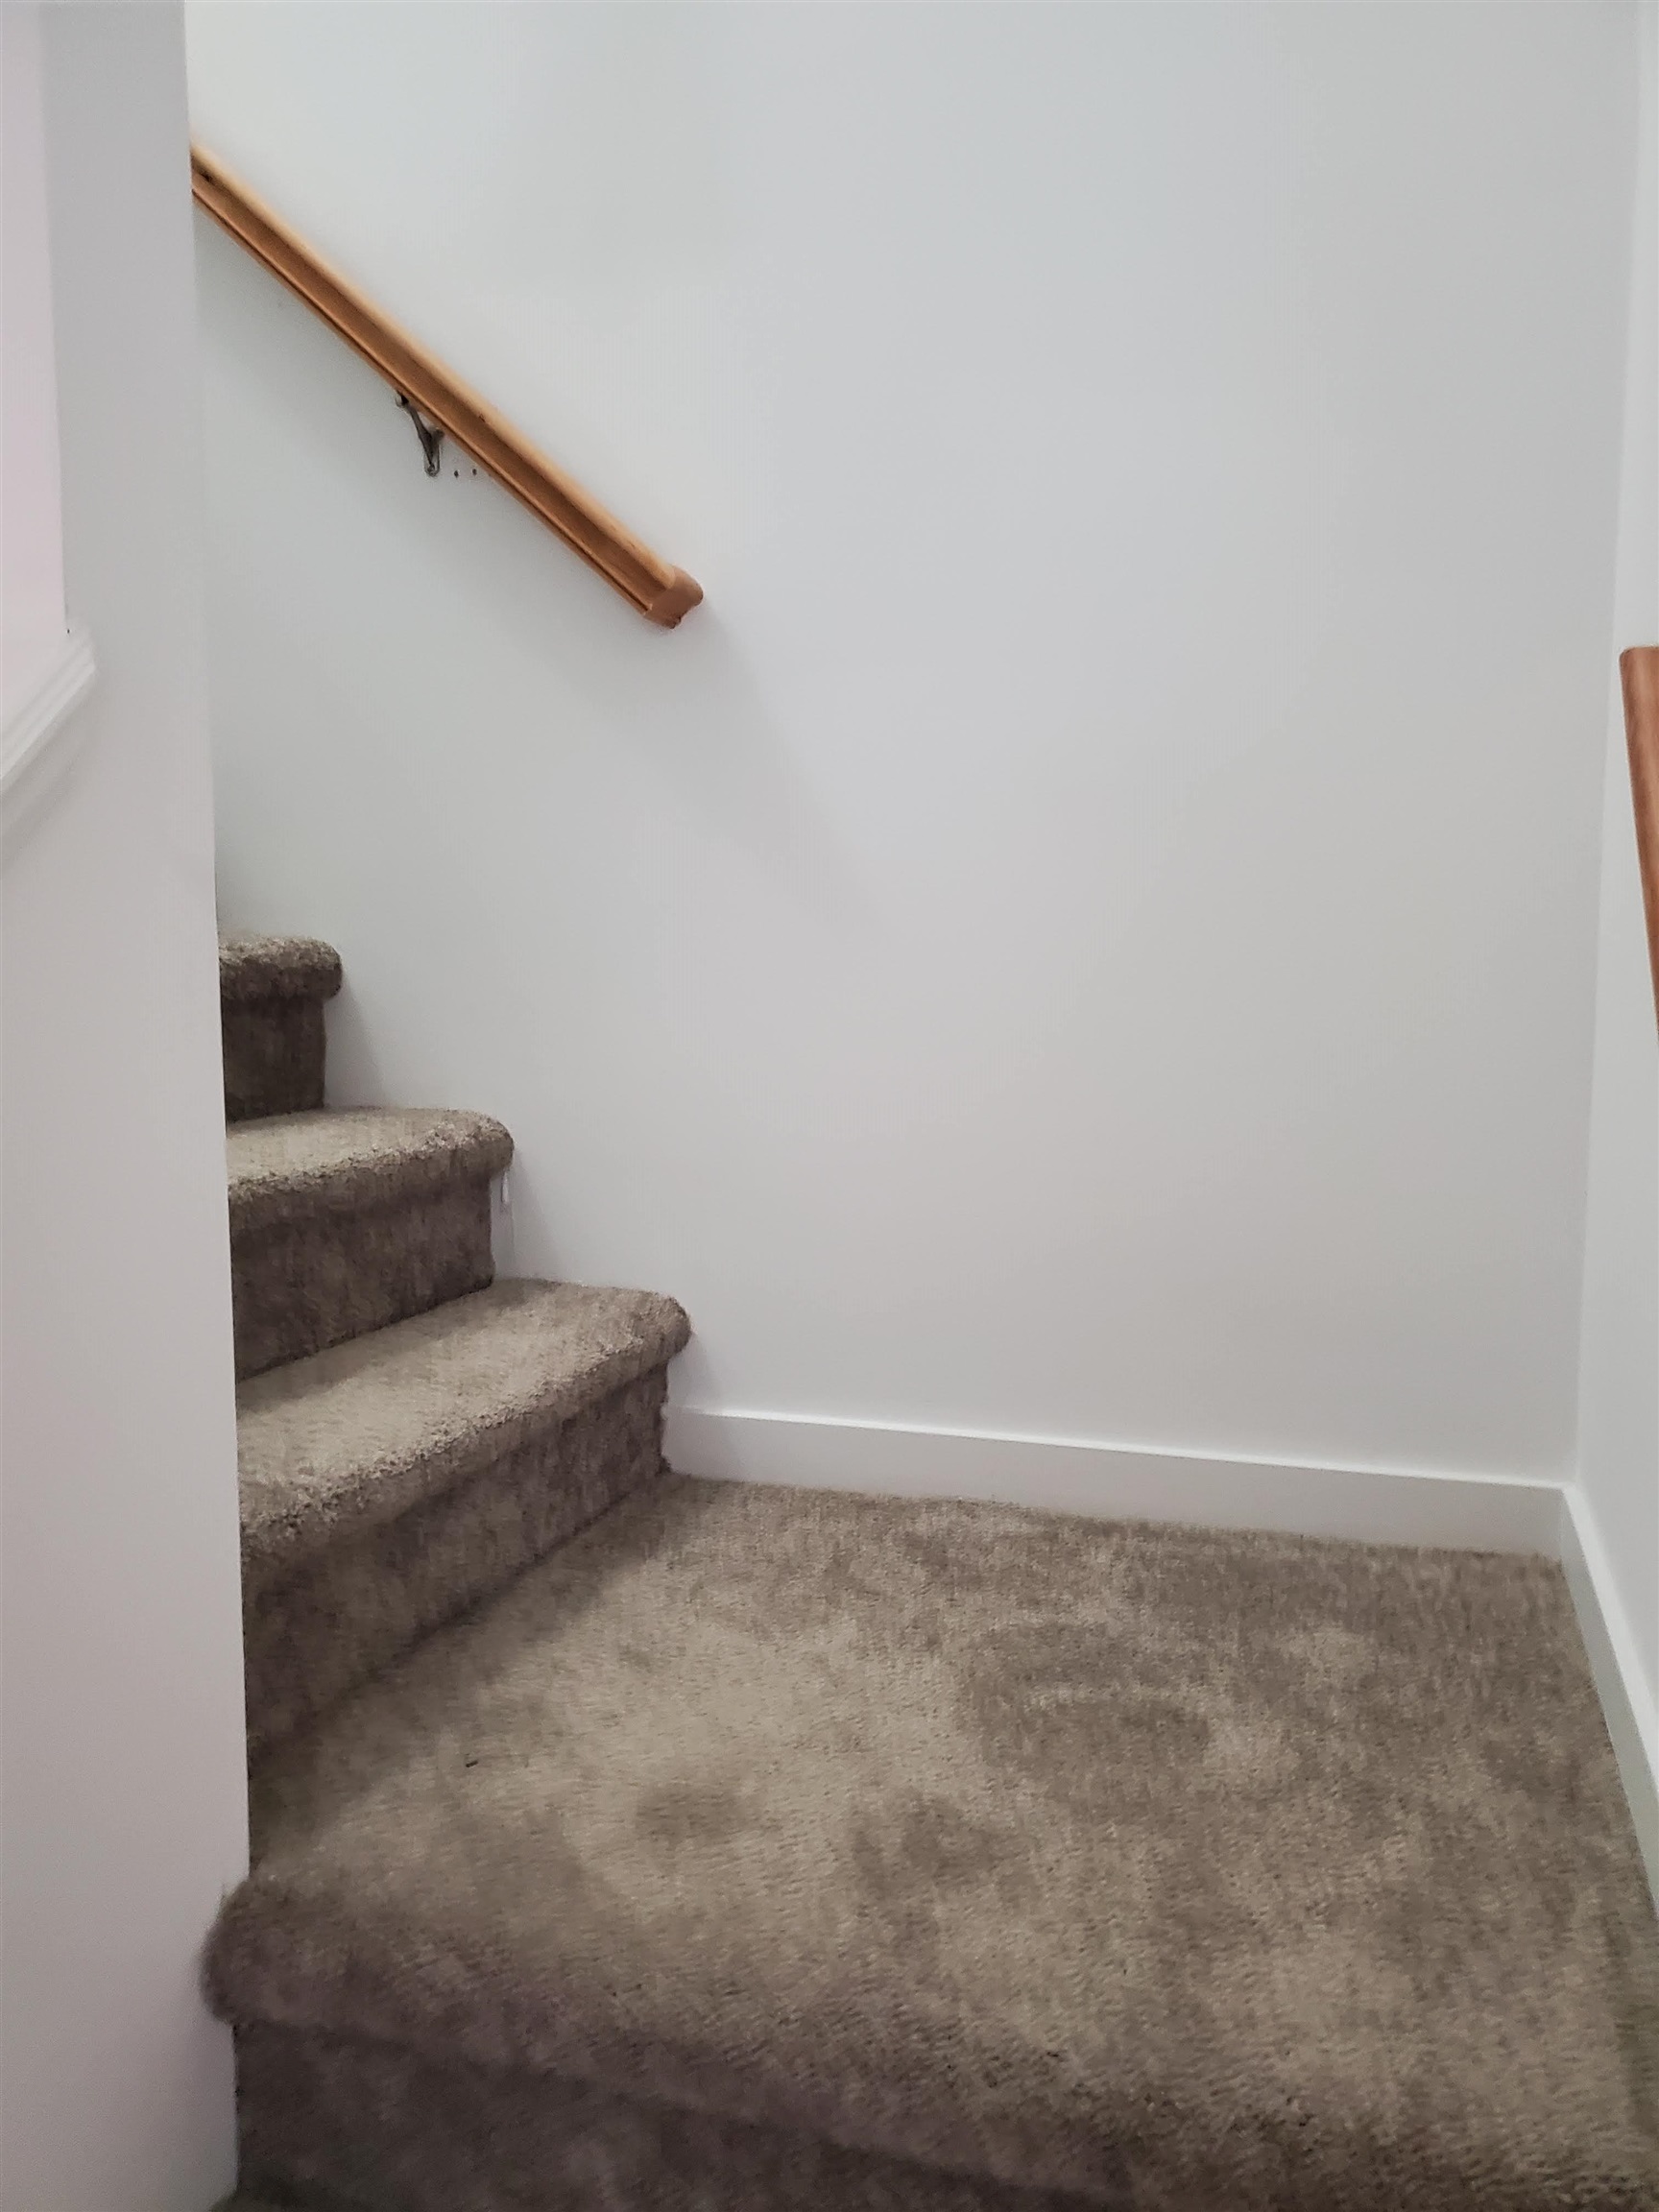 Stair way to second floor